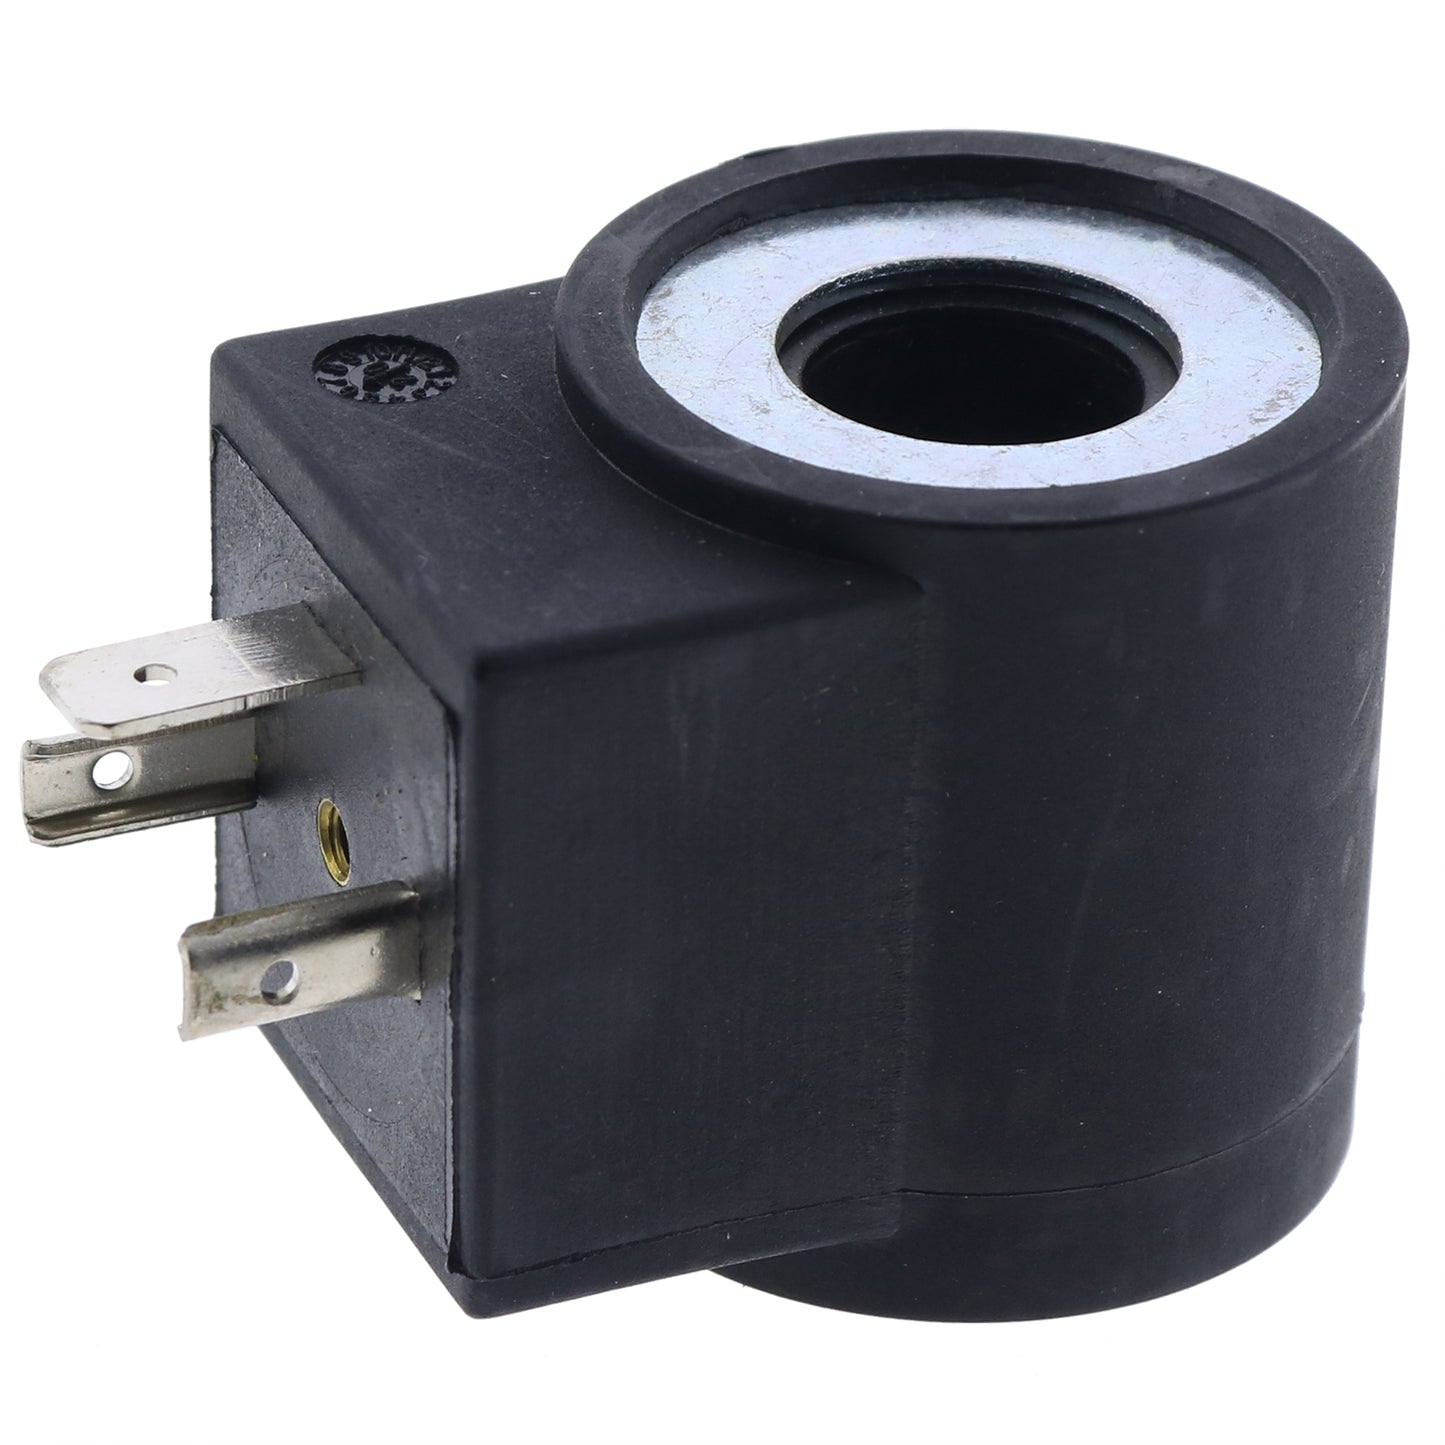 New Cylindrical Solenoid Valve Coil 6306012 with 3 Prongs DIN Connector 24V DC Compatible with HydraForce Valve Stem Series 08 80 88 98